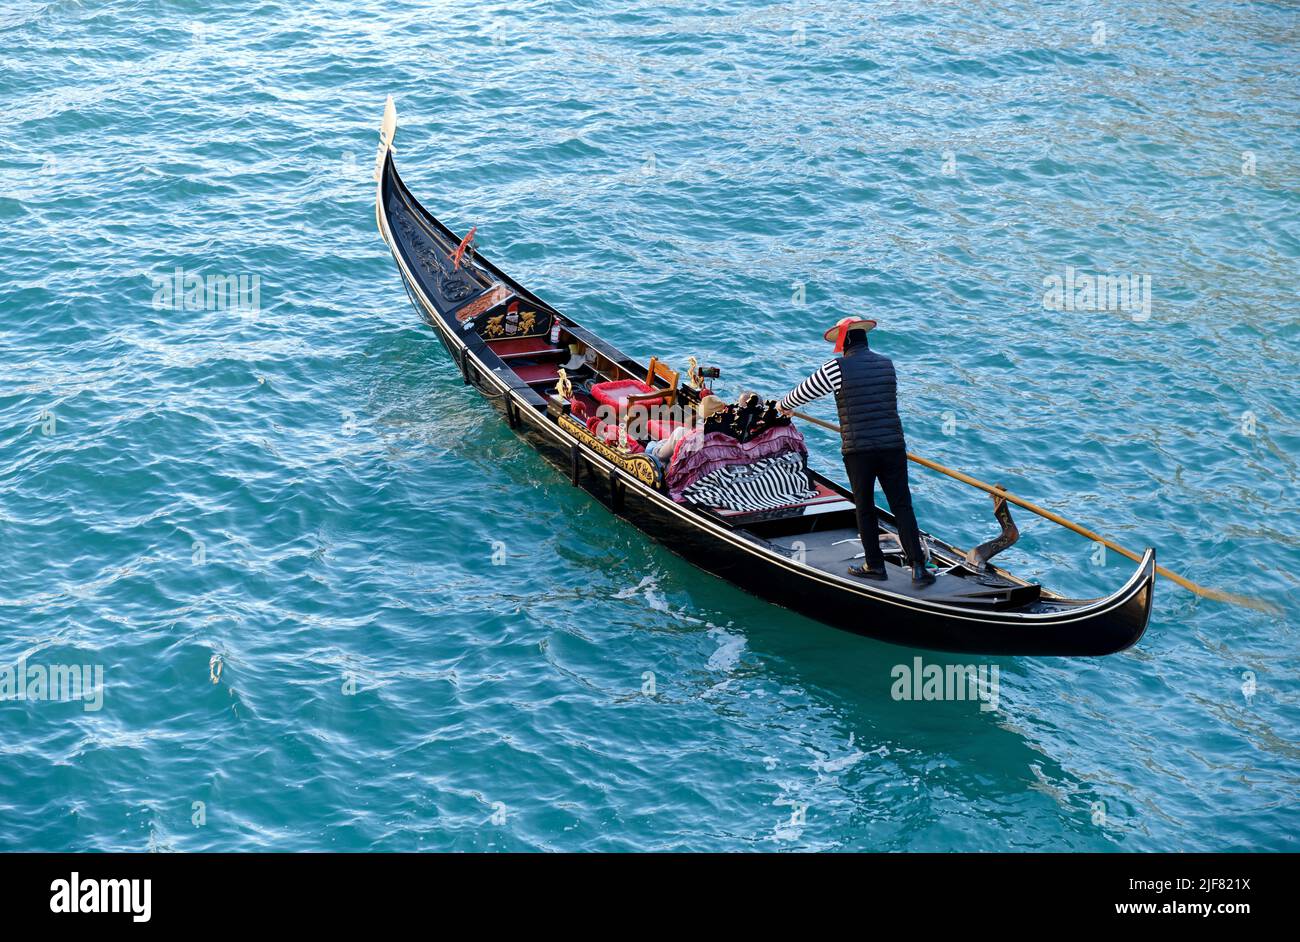 Venetian gondolier carries tourists on gondola in Grand Canal in Venice, Italy Stock Photo